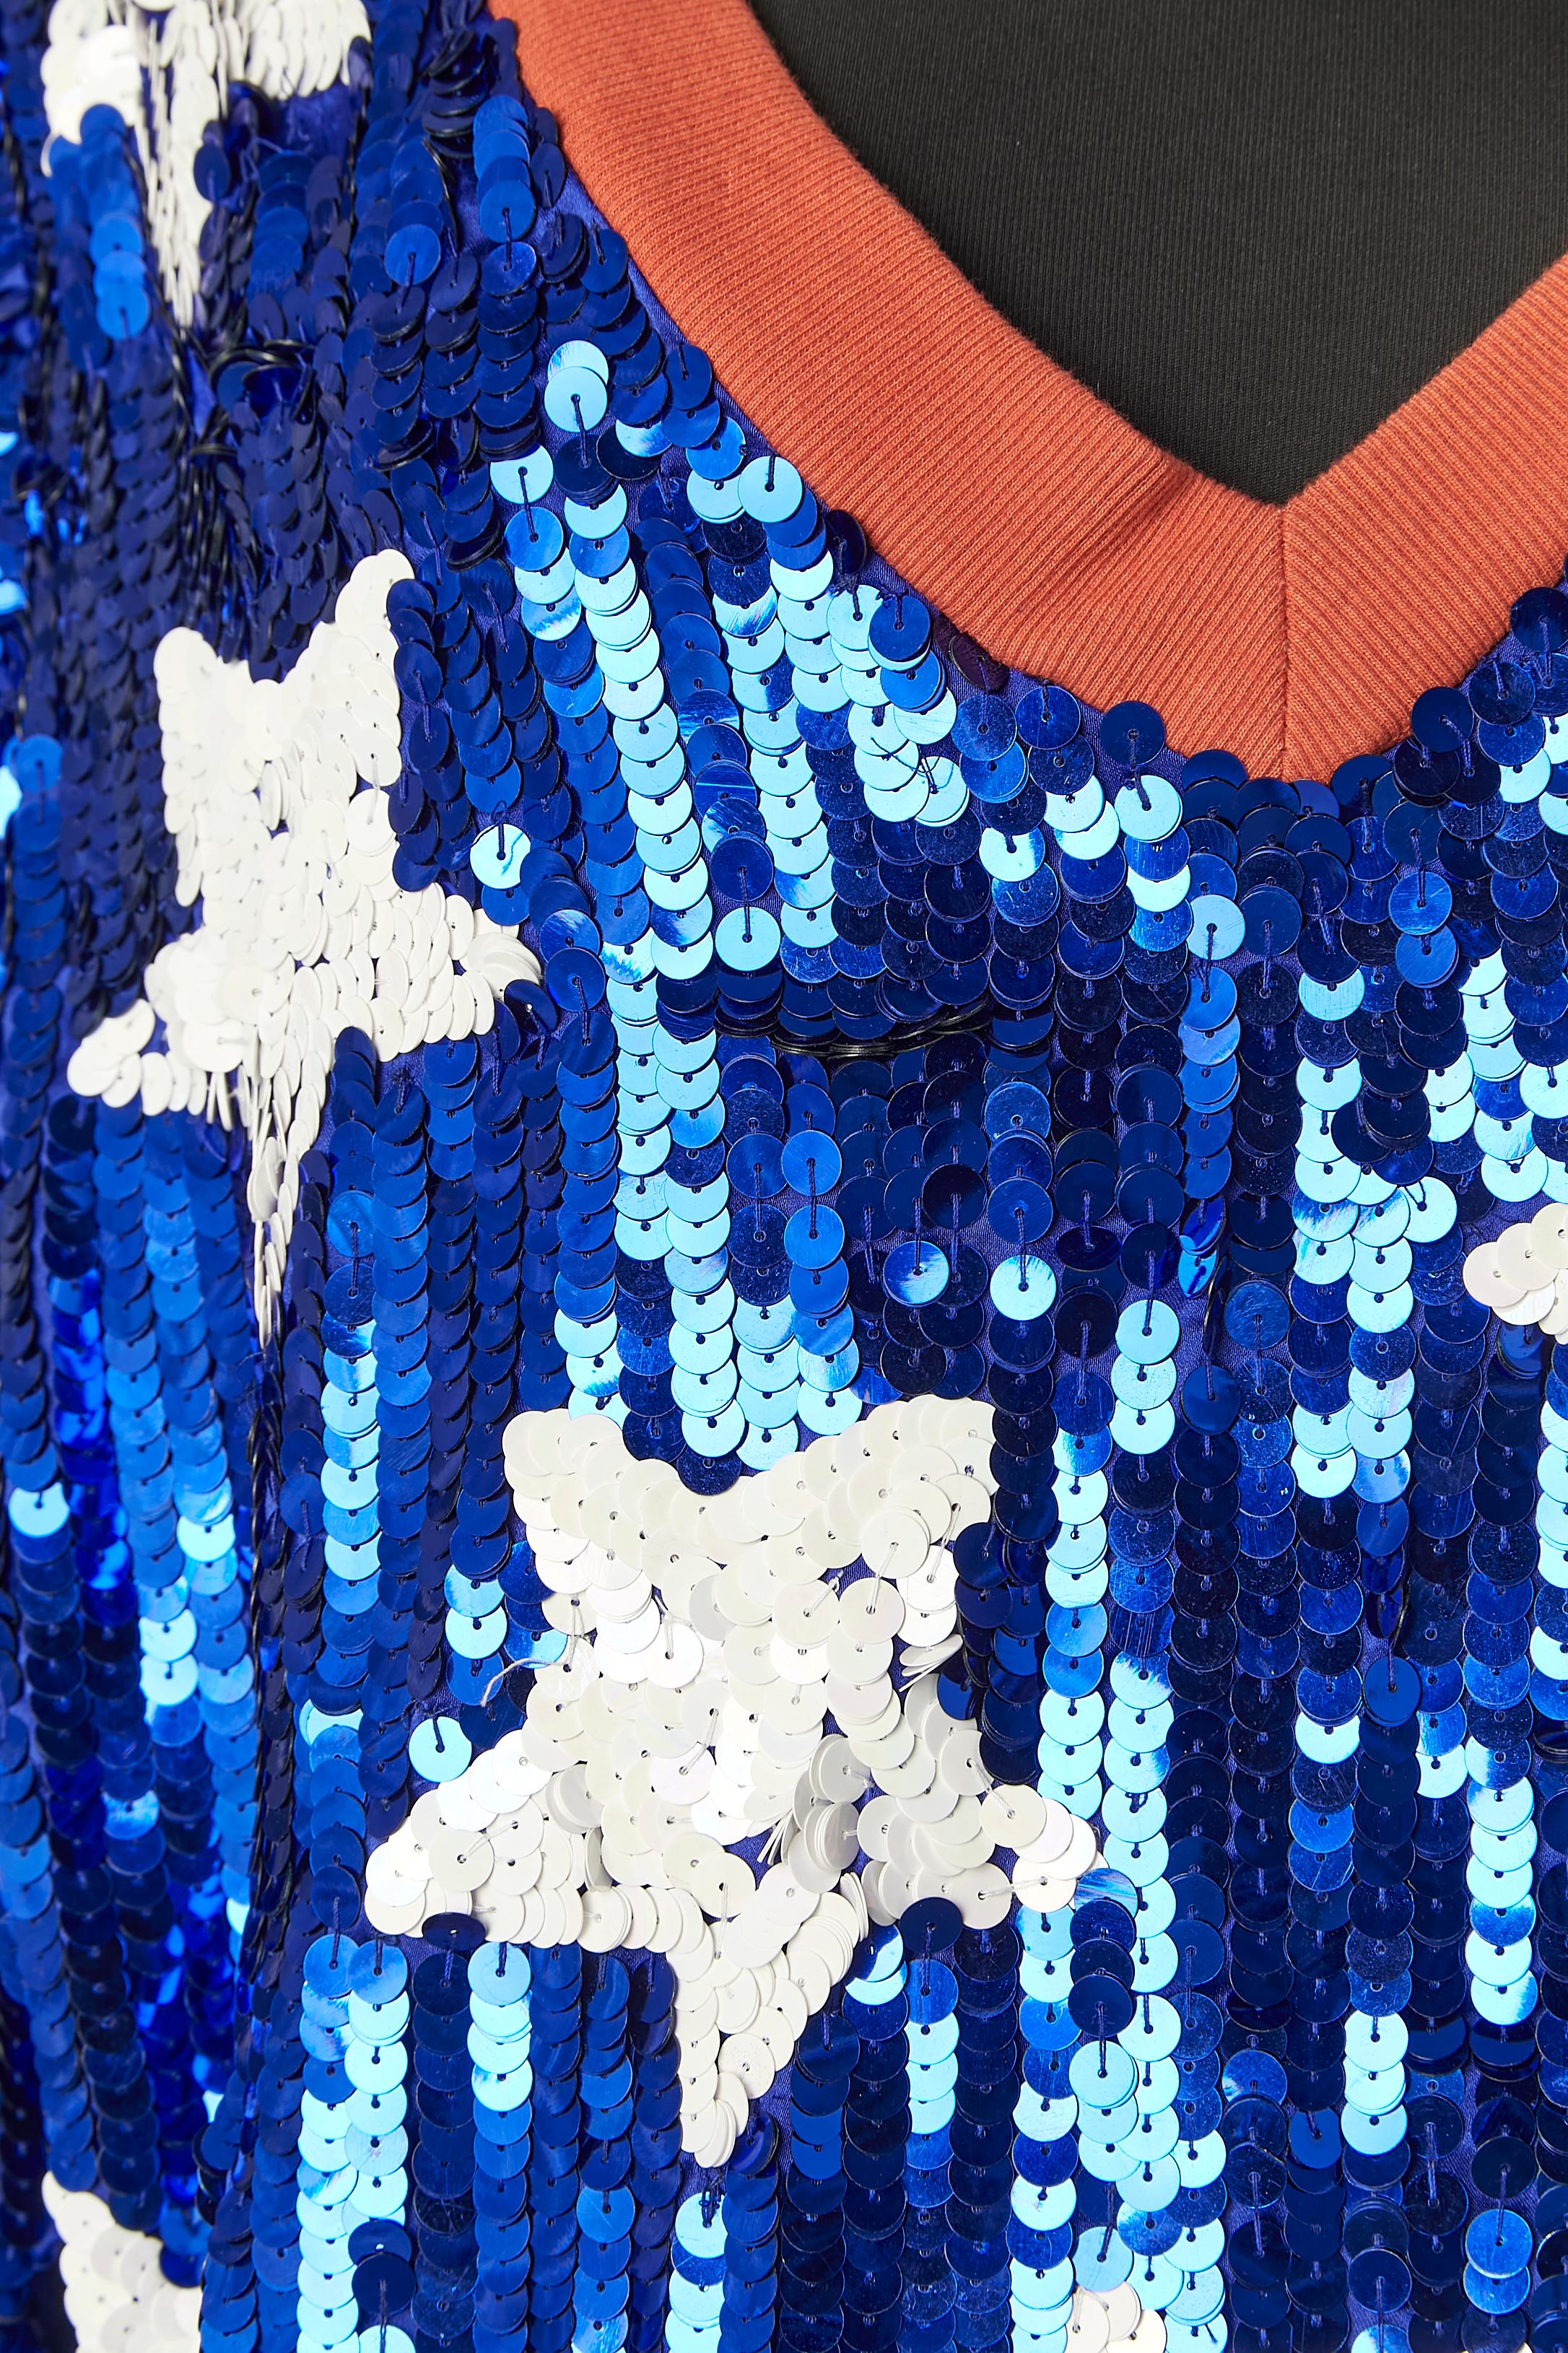 Blue sequin dress with white star sequins pattern . Fabric composition: 100% polyester. The back is plain polyester satin. Orange cotton ribbing on the neck-line,on the bottom edge and on the sleeves edge 
SIZE 40 / L 